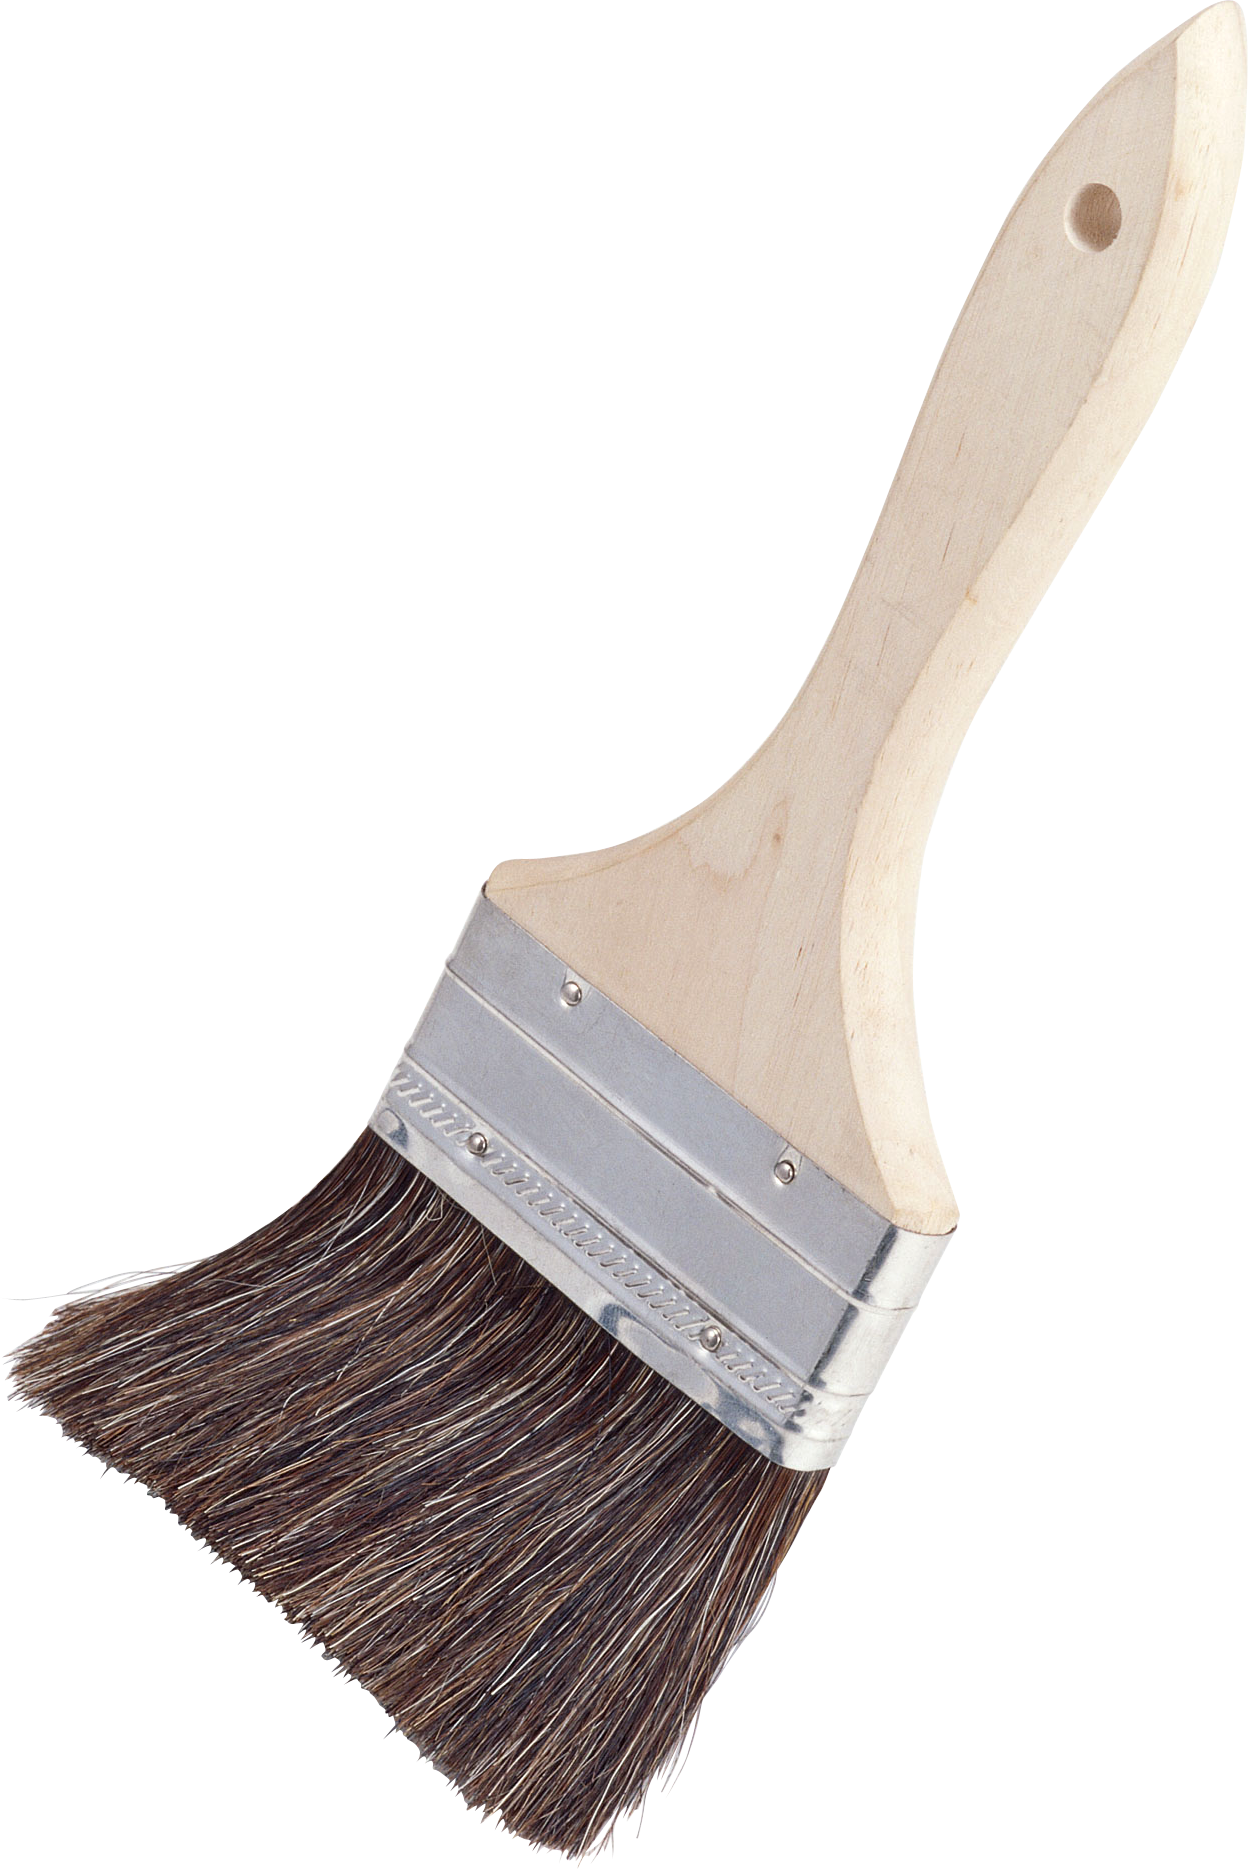 Paint Brush Background PNG Image